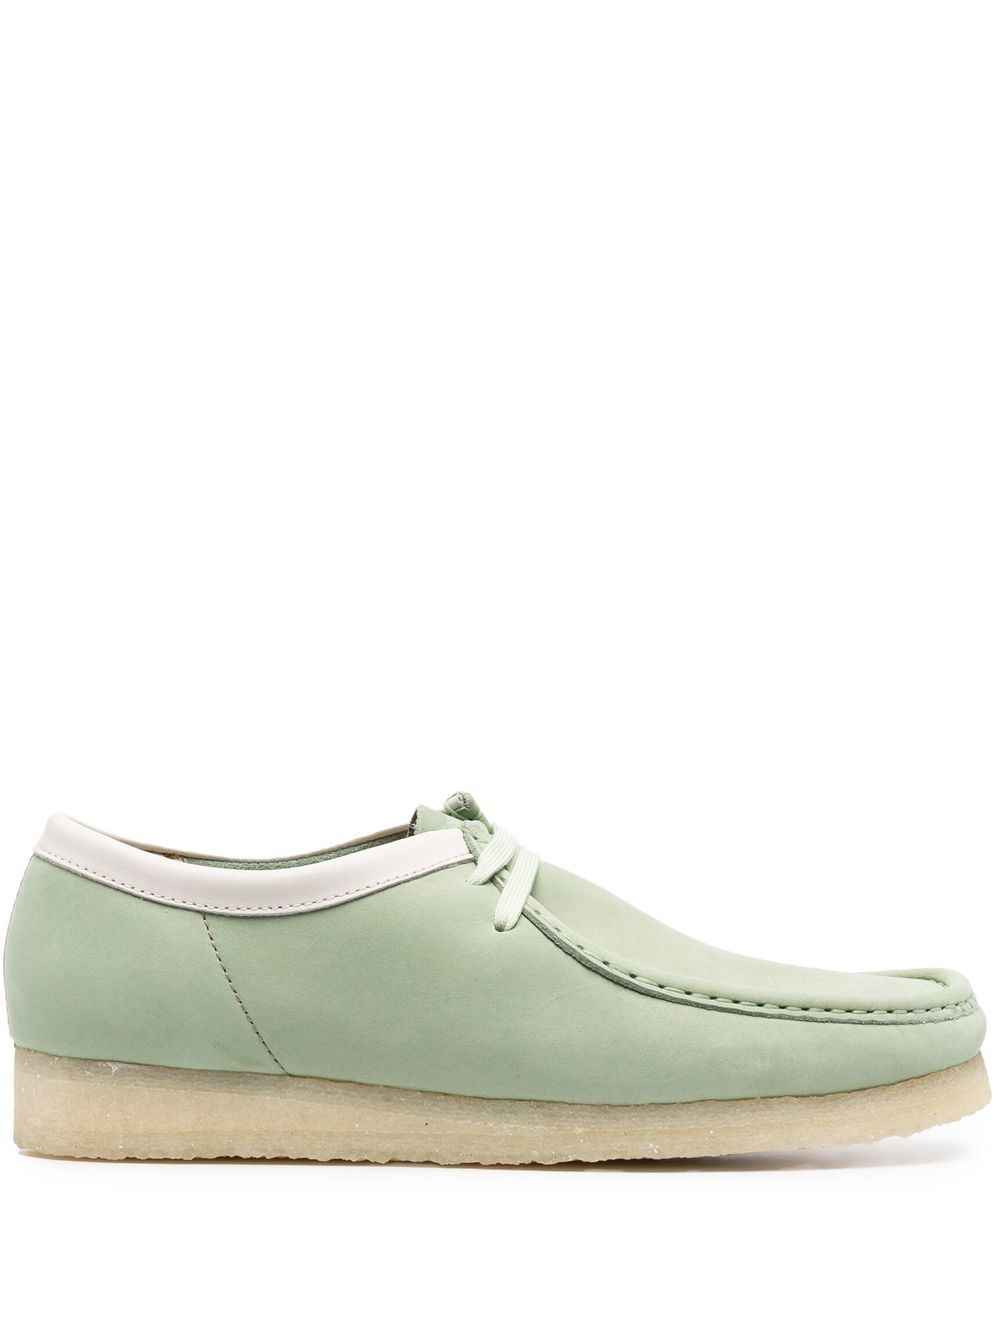 Clarks Originals Suede-leather Laced Boat Shoes In Grün | ModeSens